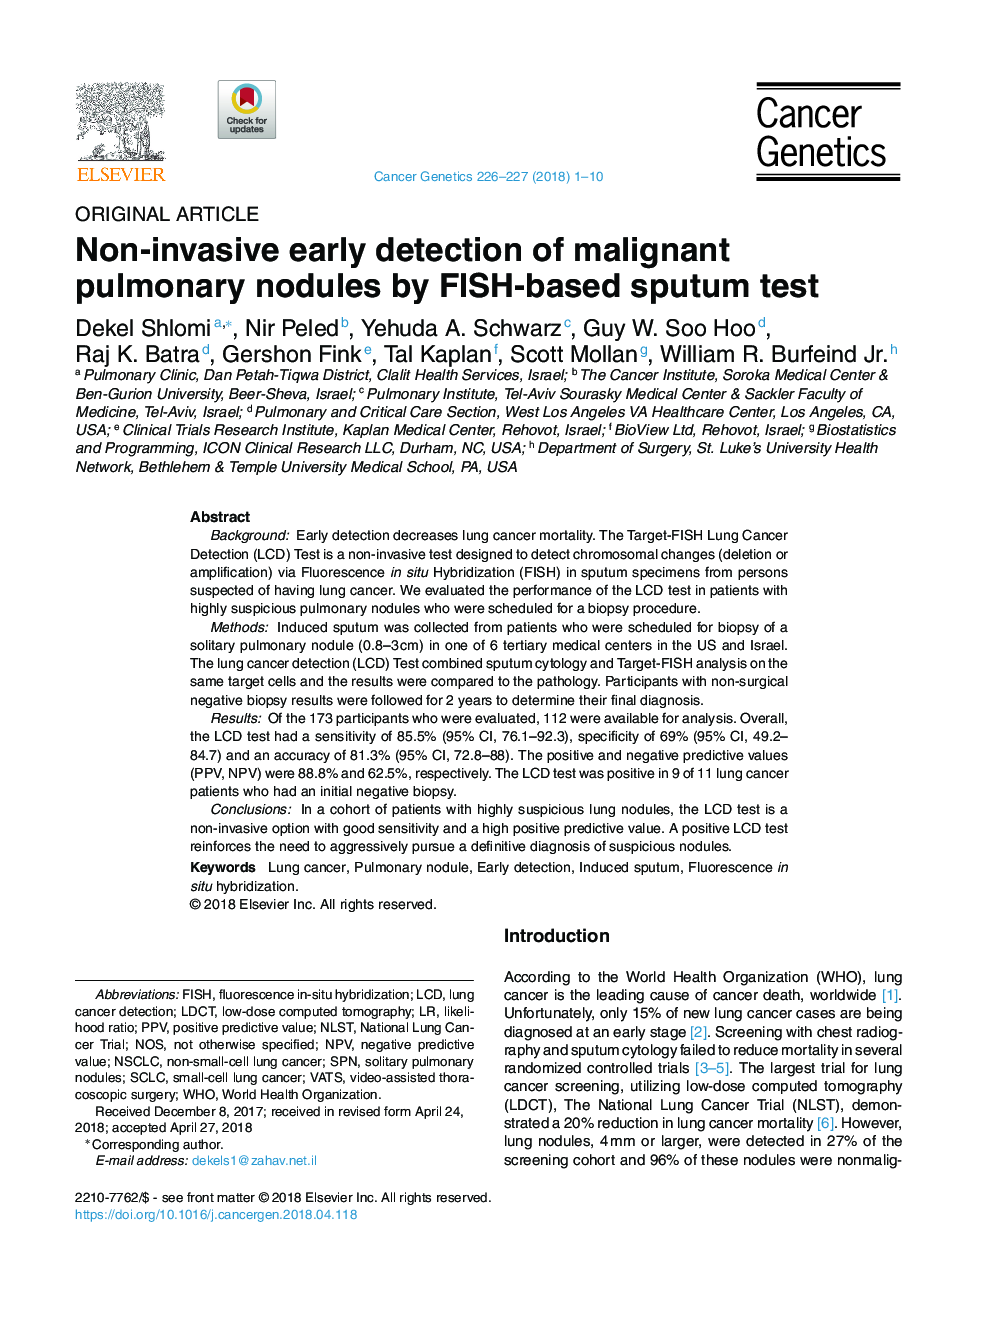 Non-invasive early detection of malignant pulmonary nodules by FISH-based sputum test